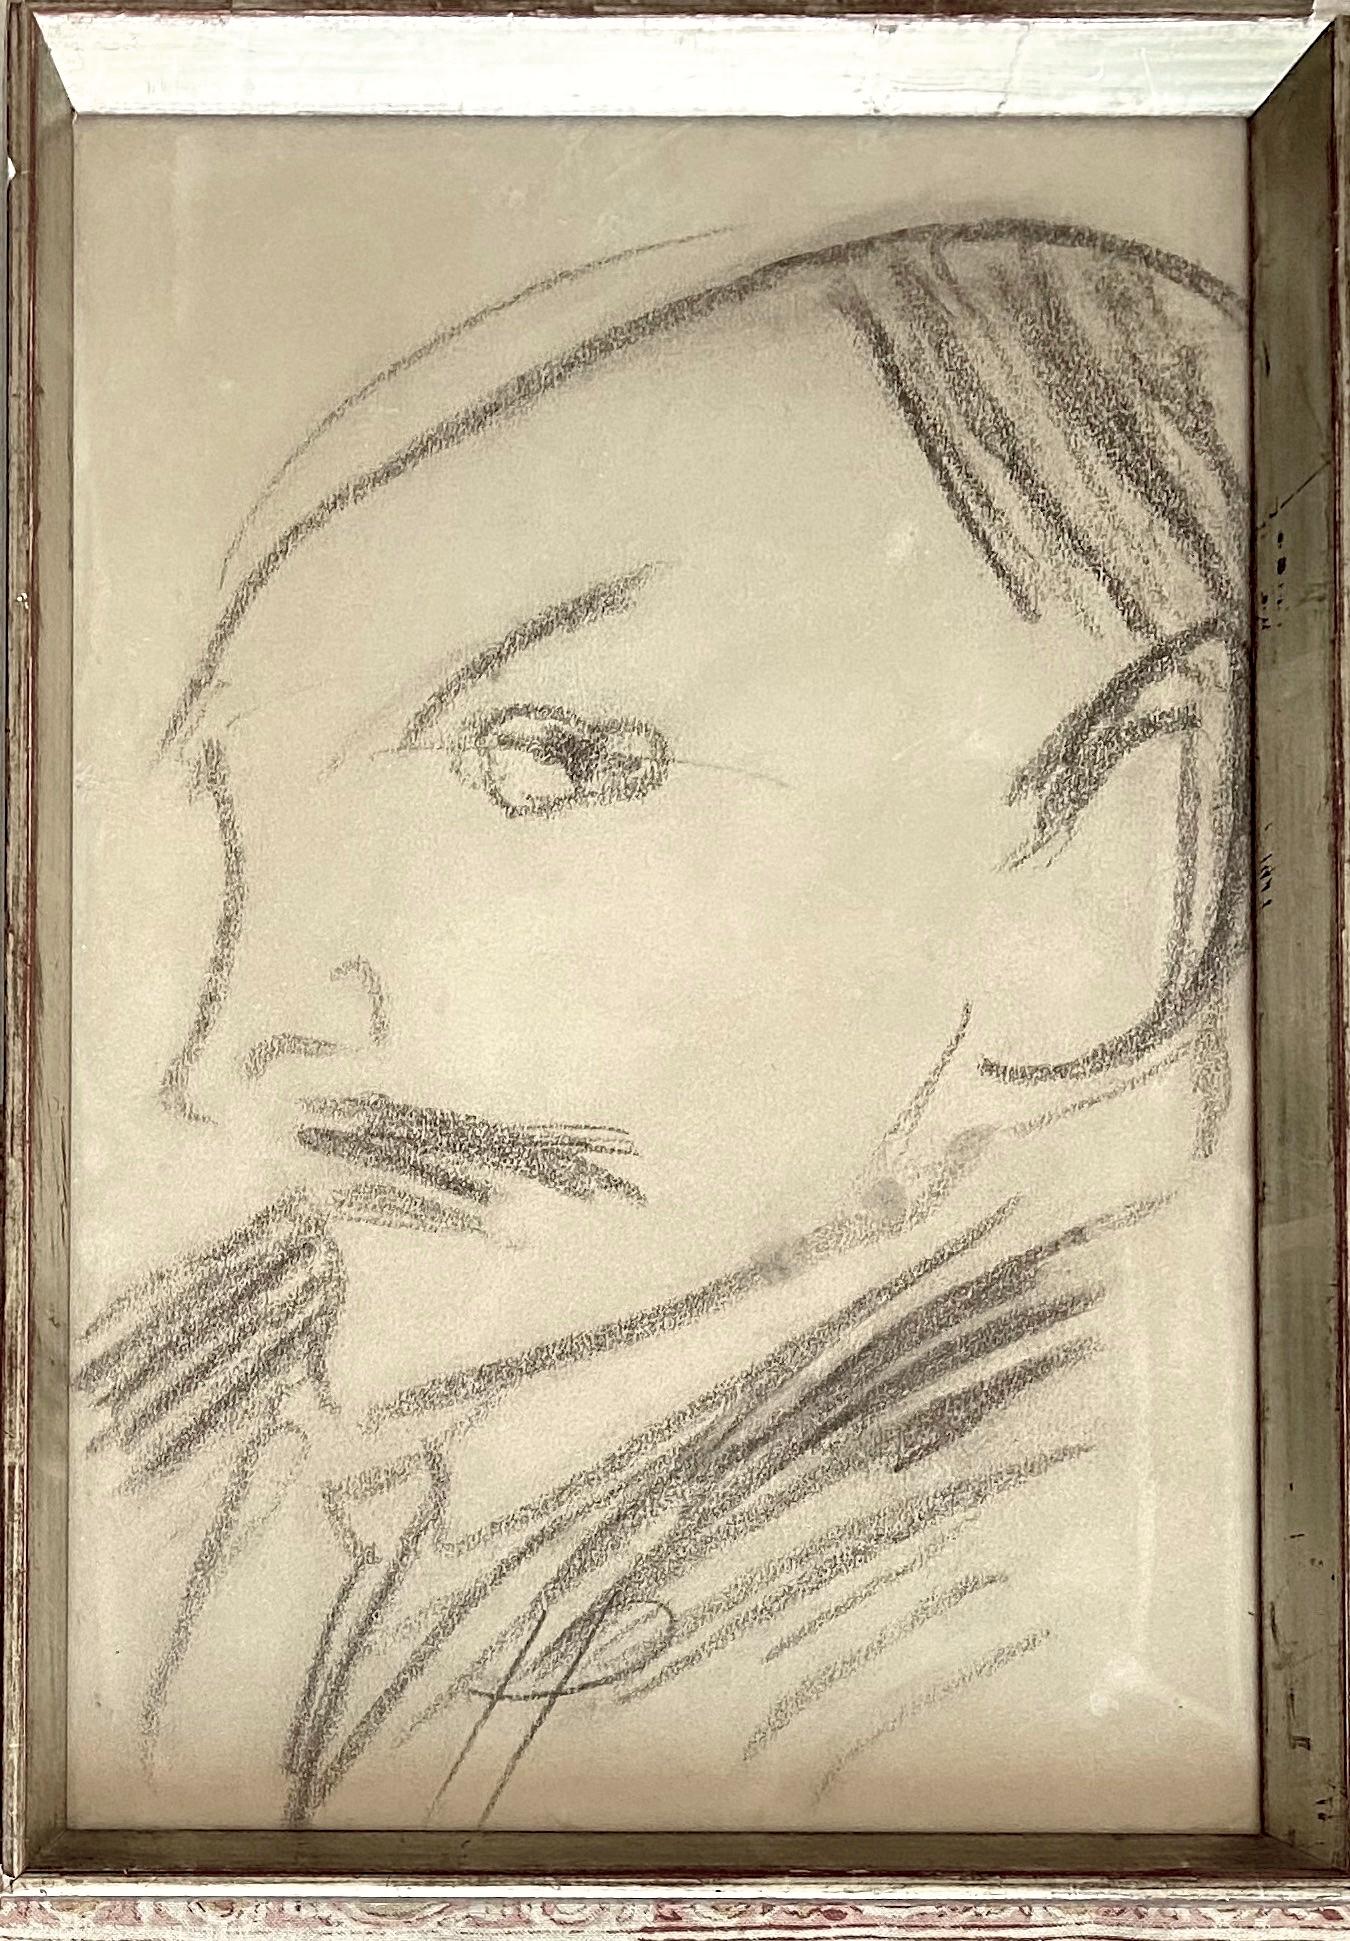 Clifford Holmead Phillips Portrait - American Expressionist in Paris 1920s Dandy with a  Moustache modernist drawing